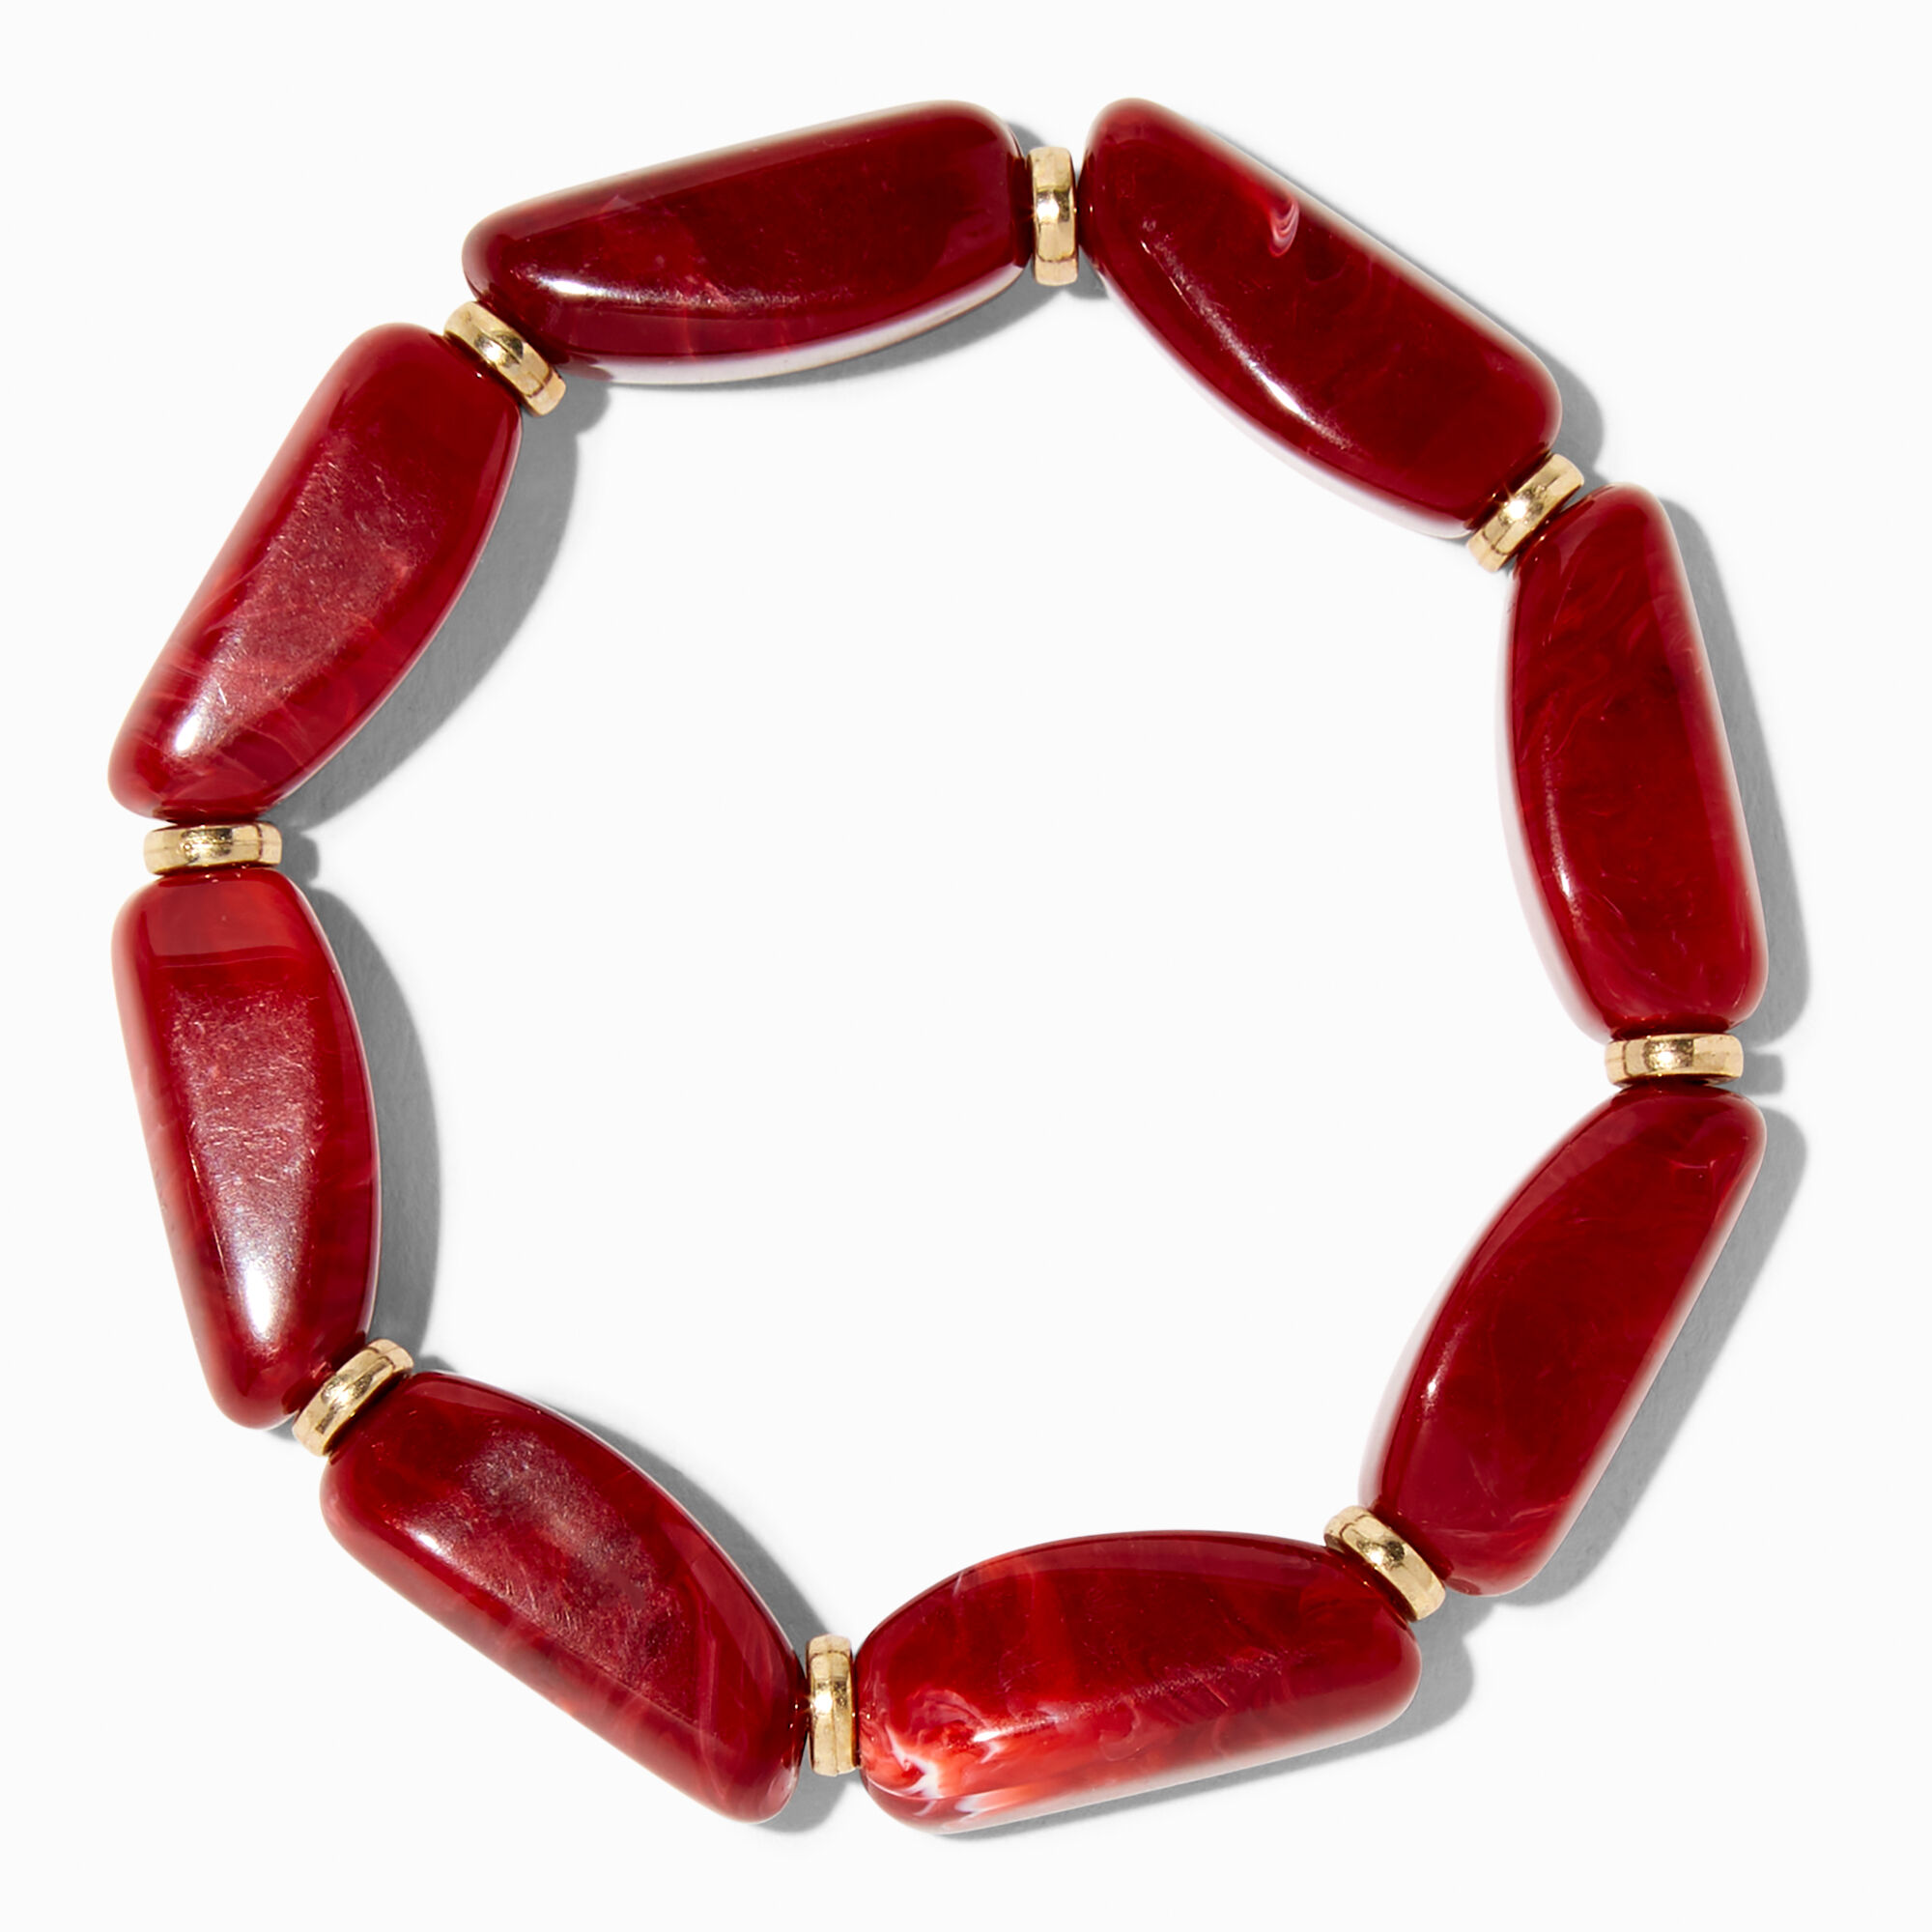 View Claires Polished Stone Stretch Bracelet Red information